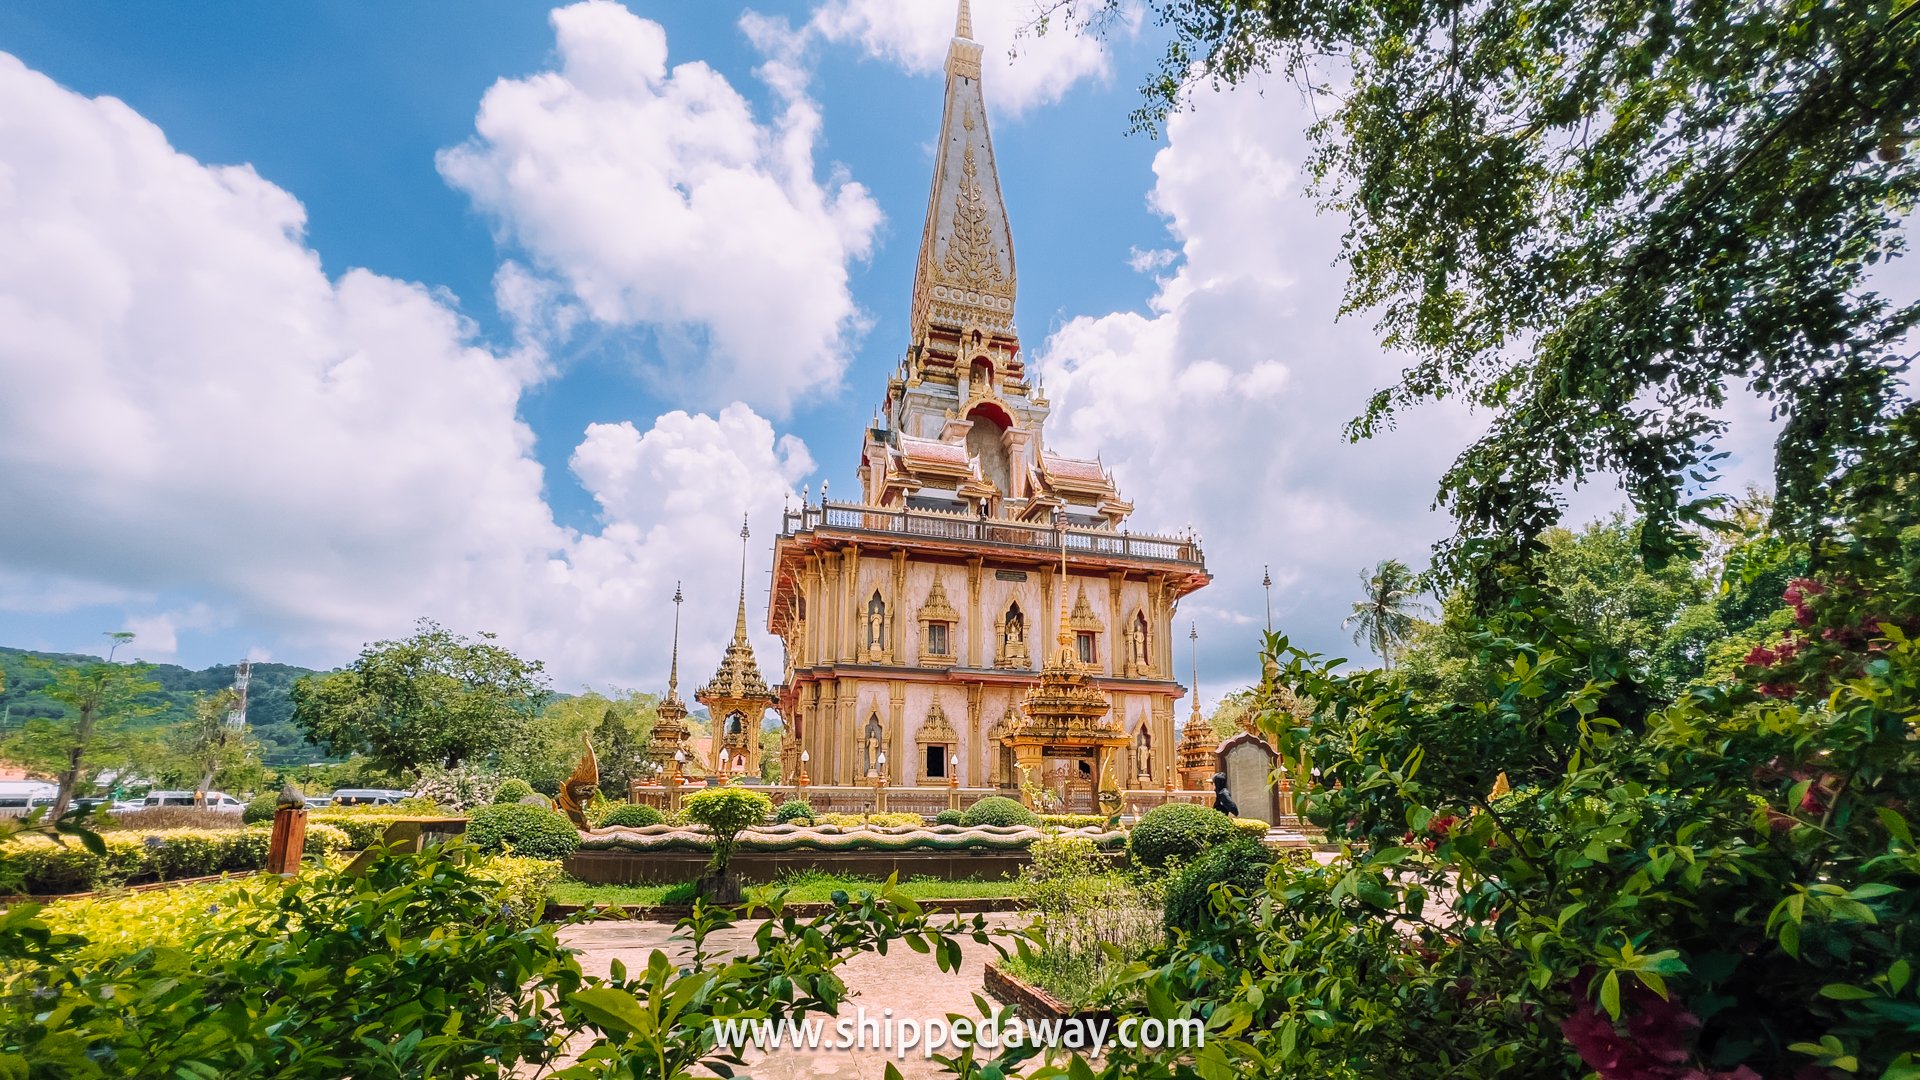 Wat Chalong temple, a must visit attraction in Phuket, Thailand